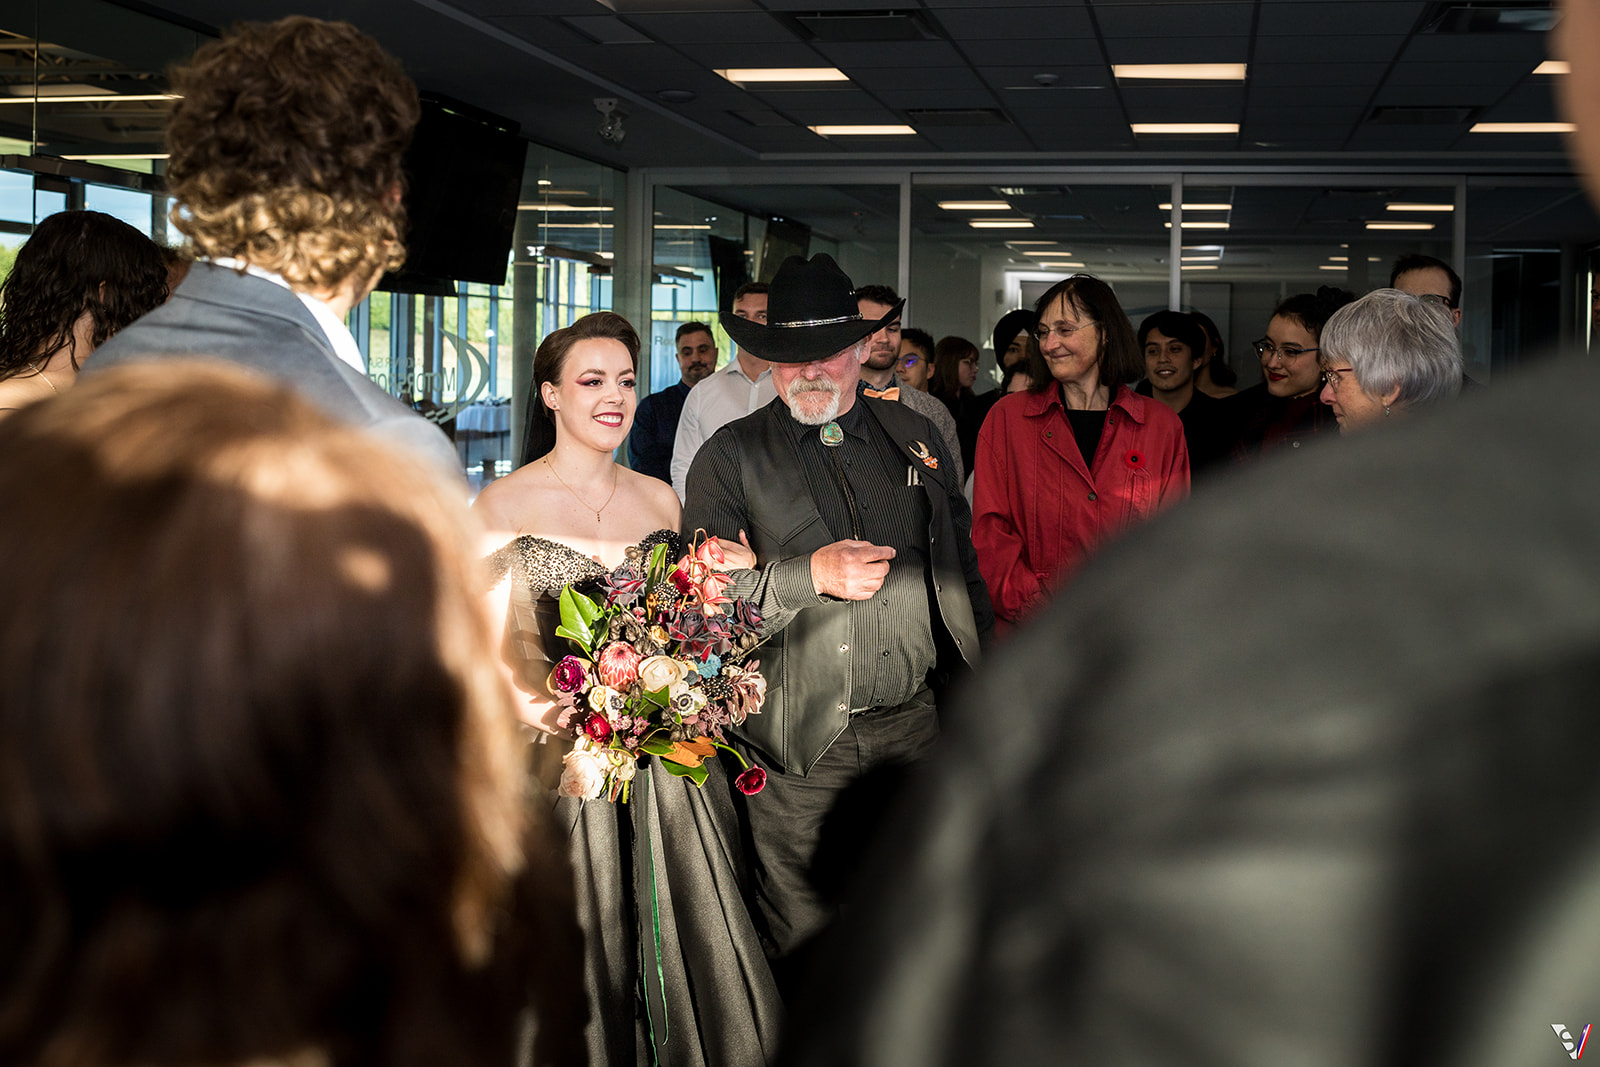 The bride's arrival is on the arm of her father, who came from Calgary, walking down the aisle. 